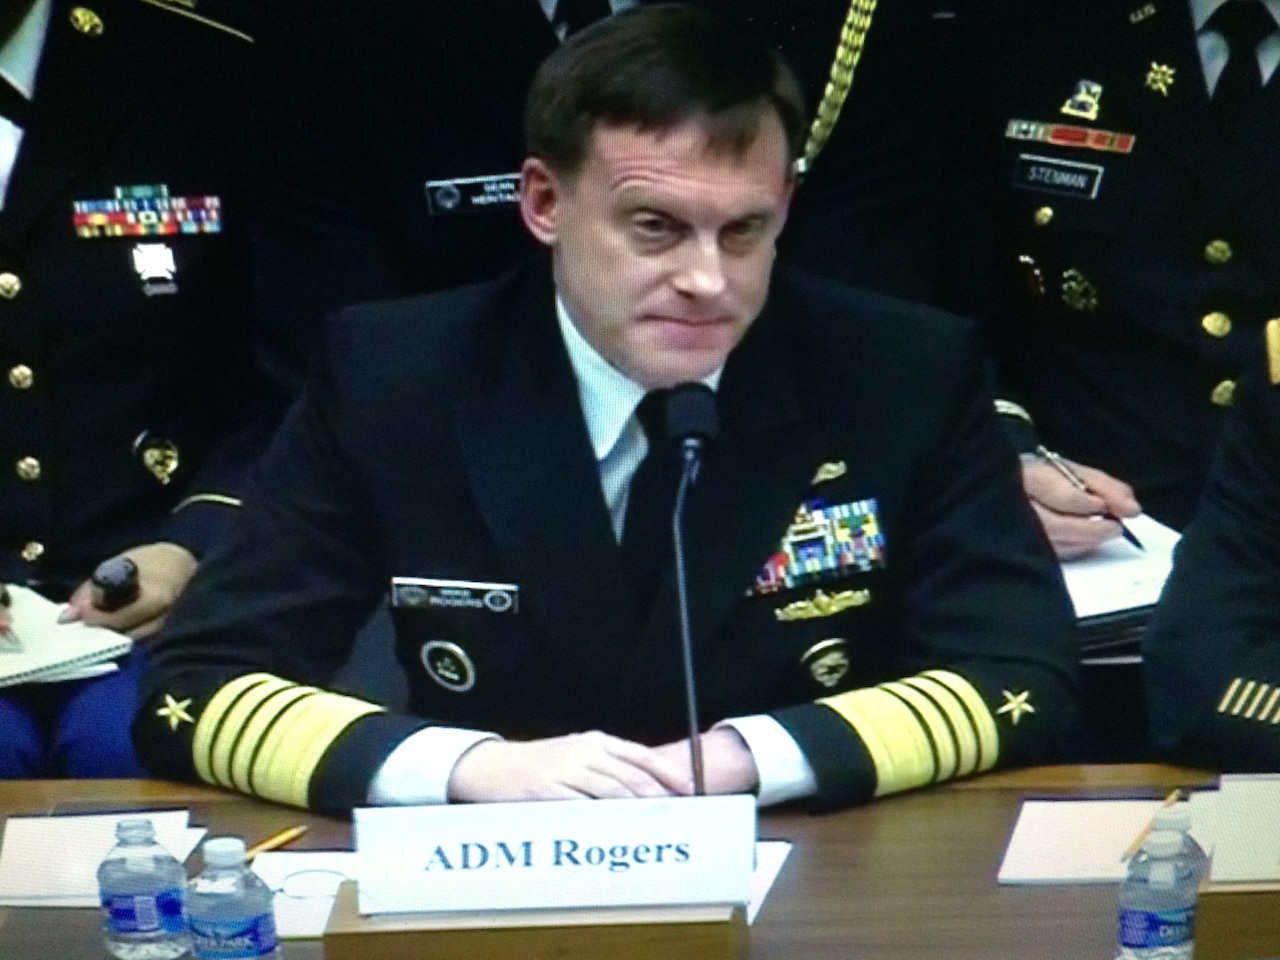 Navy Adm. Michael S. Rogers, commander of U.S. Cyber Command and director of the National Security Agency, testifies before the House Armed Services Committee improving the military cyber security posture in an uncertain threat environment, March 4, 2015. DoD photo by Cheryl Pellerin